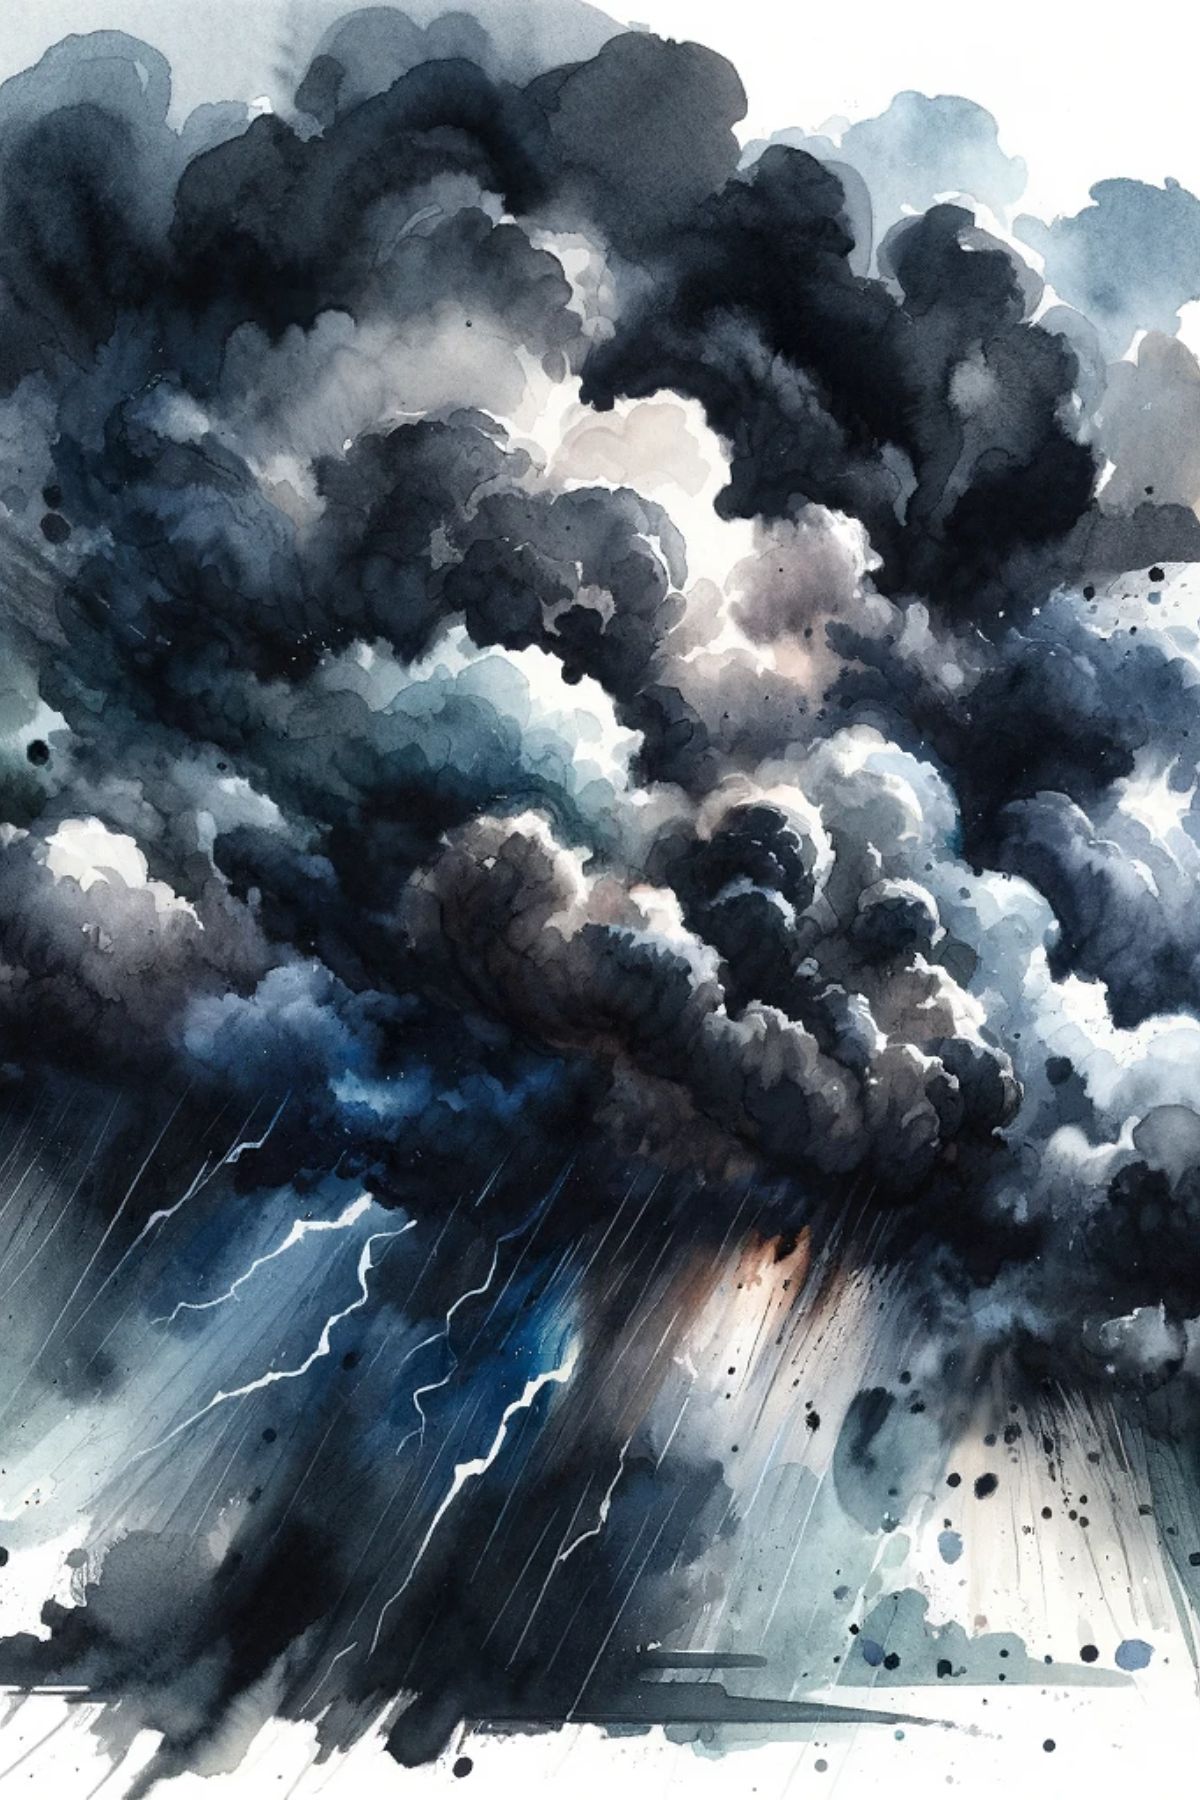 Cover image for prayer for anger post - features a watercolor stormy scene